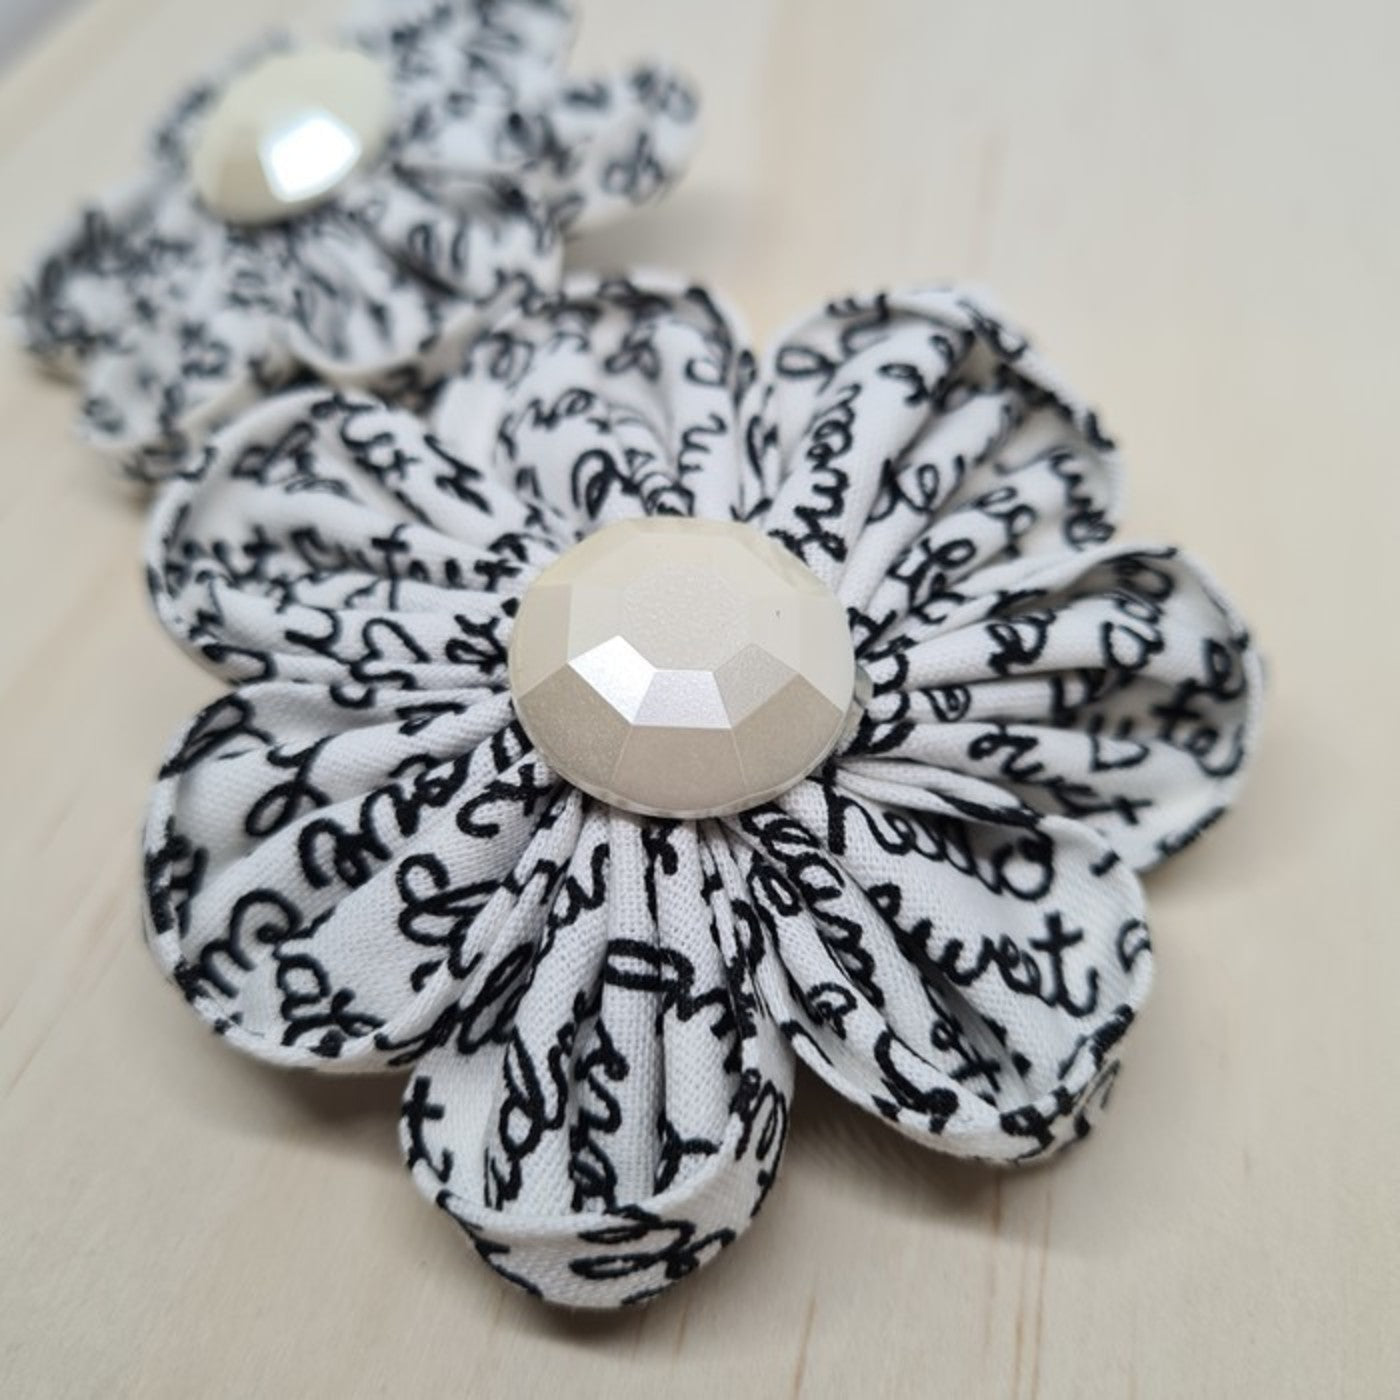 Flower Bloom - Affectionate Words - black & white - Fabric Clip